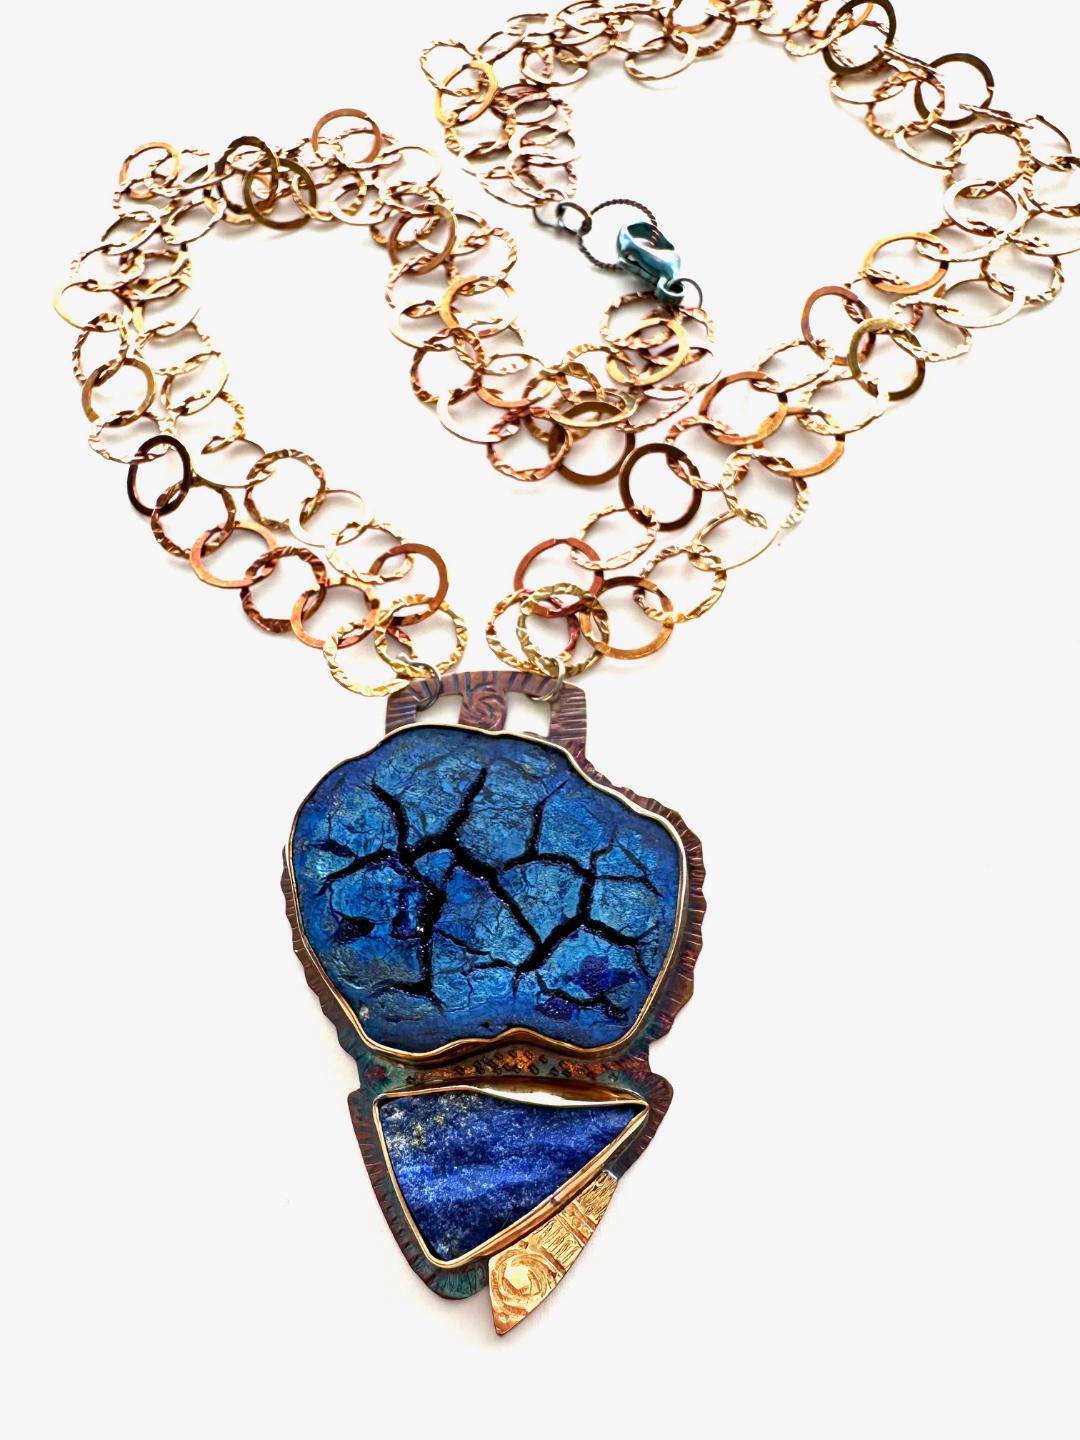 Sterling Silver, Fine Silver Bezels, 18k Gold, Azurite Nodule Slice, and Natural Surface Lapis Lazuli Necklace with Sterling Silver Chain and Lobster Clasp